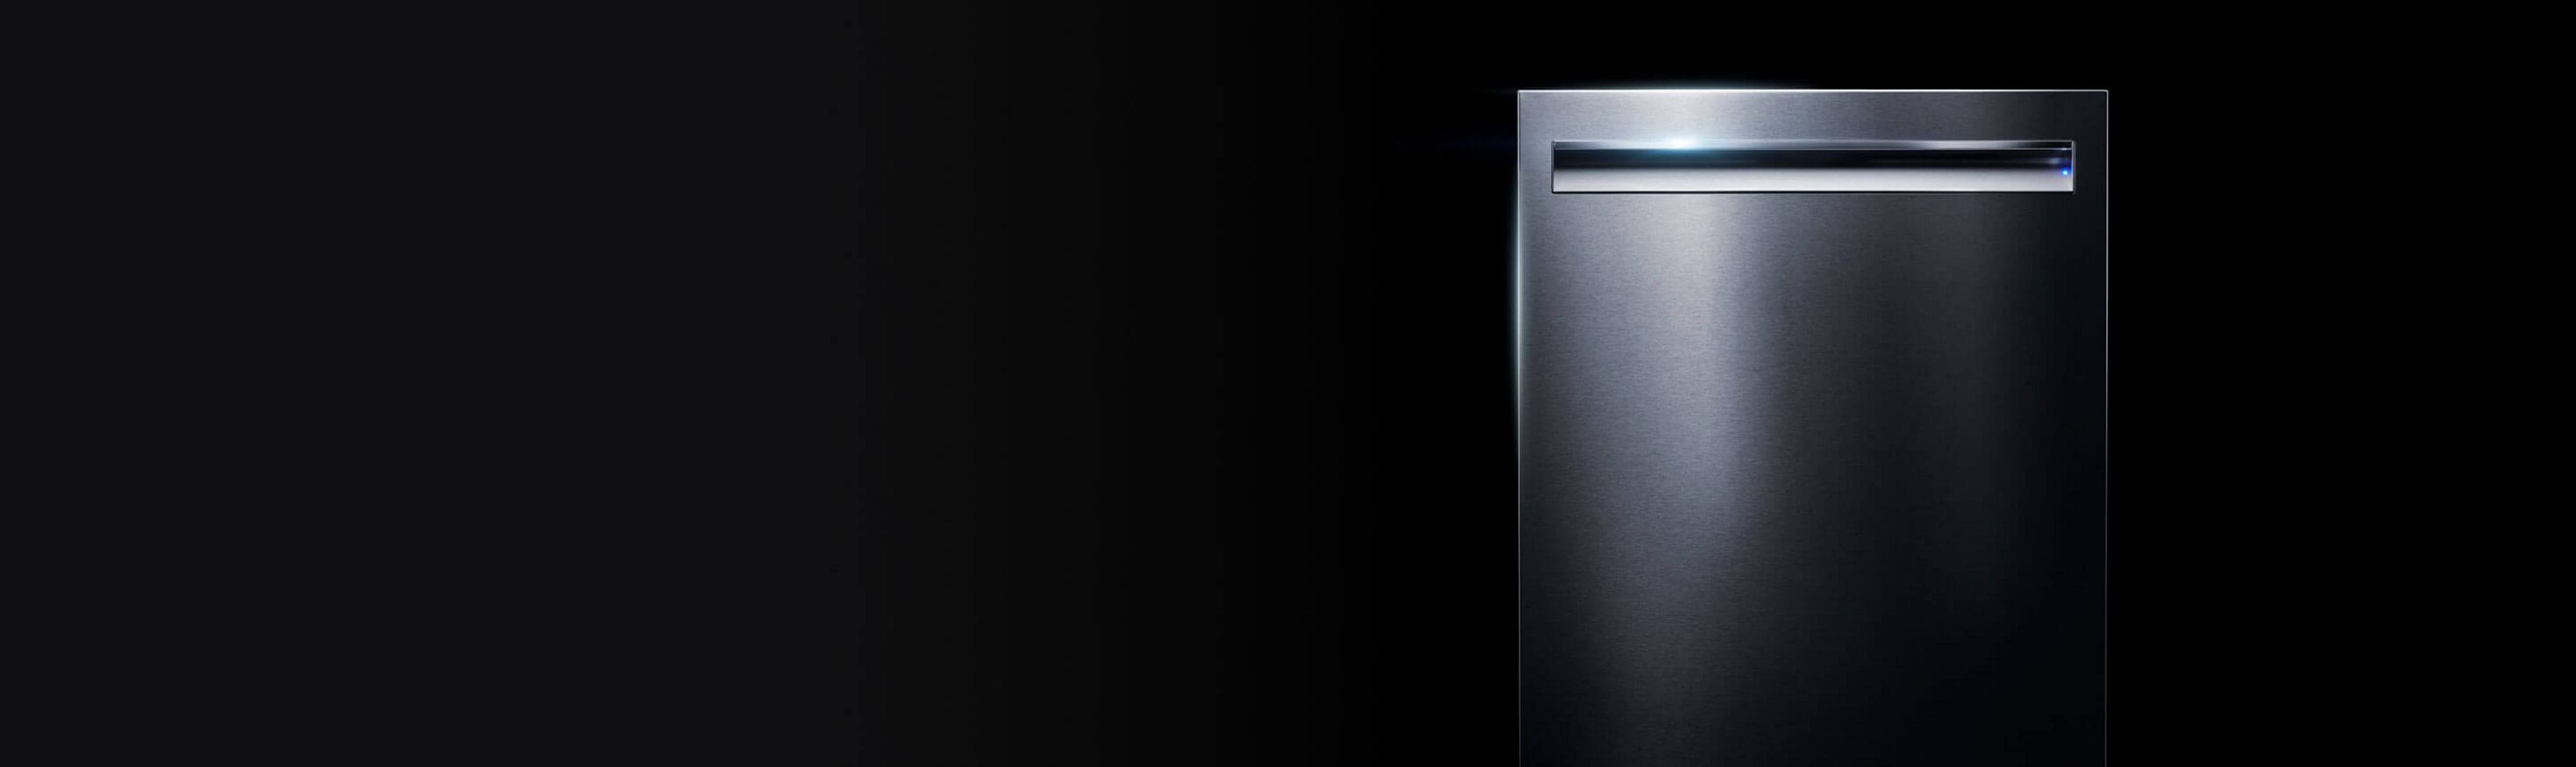 Samsung Dishwashers (39 products) find prices here »